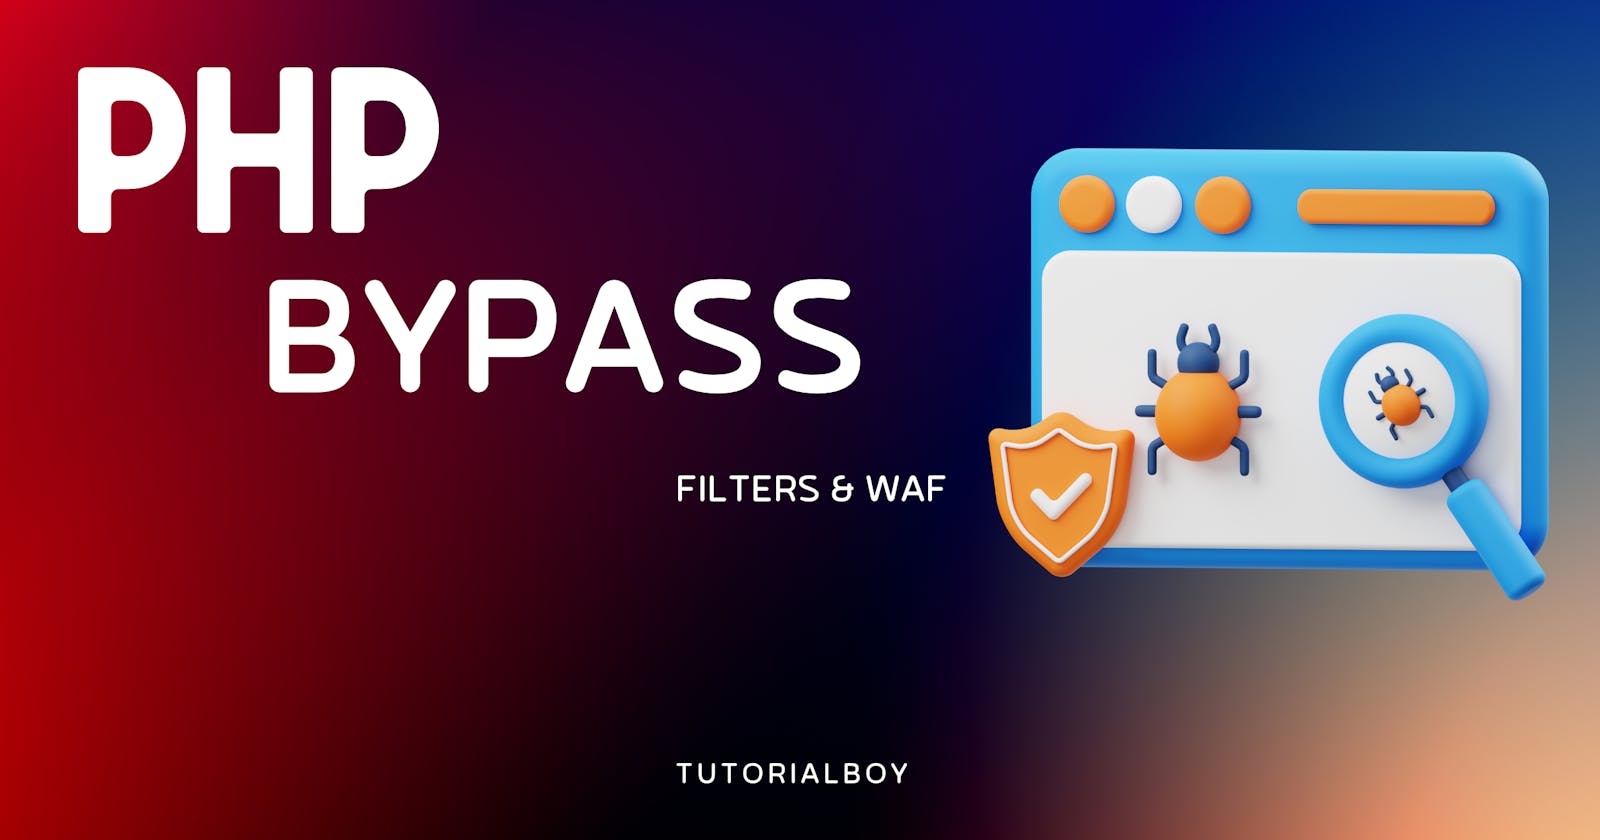 How To Exploit PHP Remotely To Bypass Filters & WAF Rules